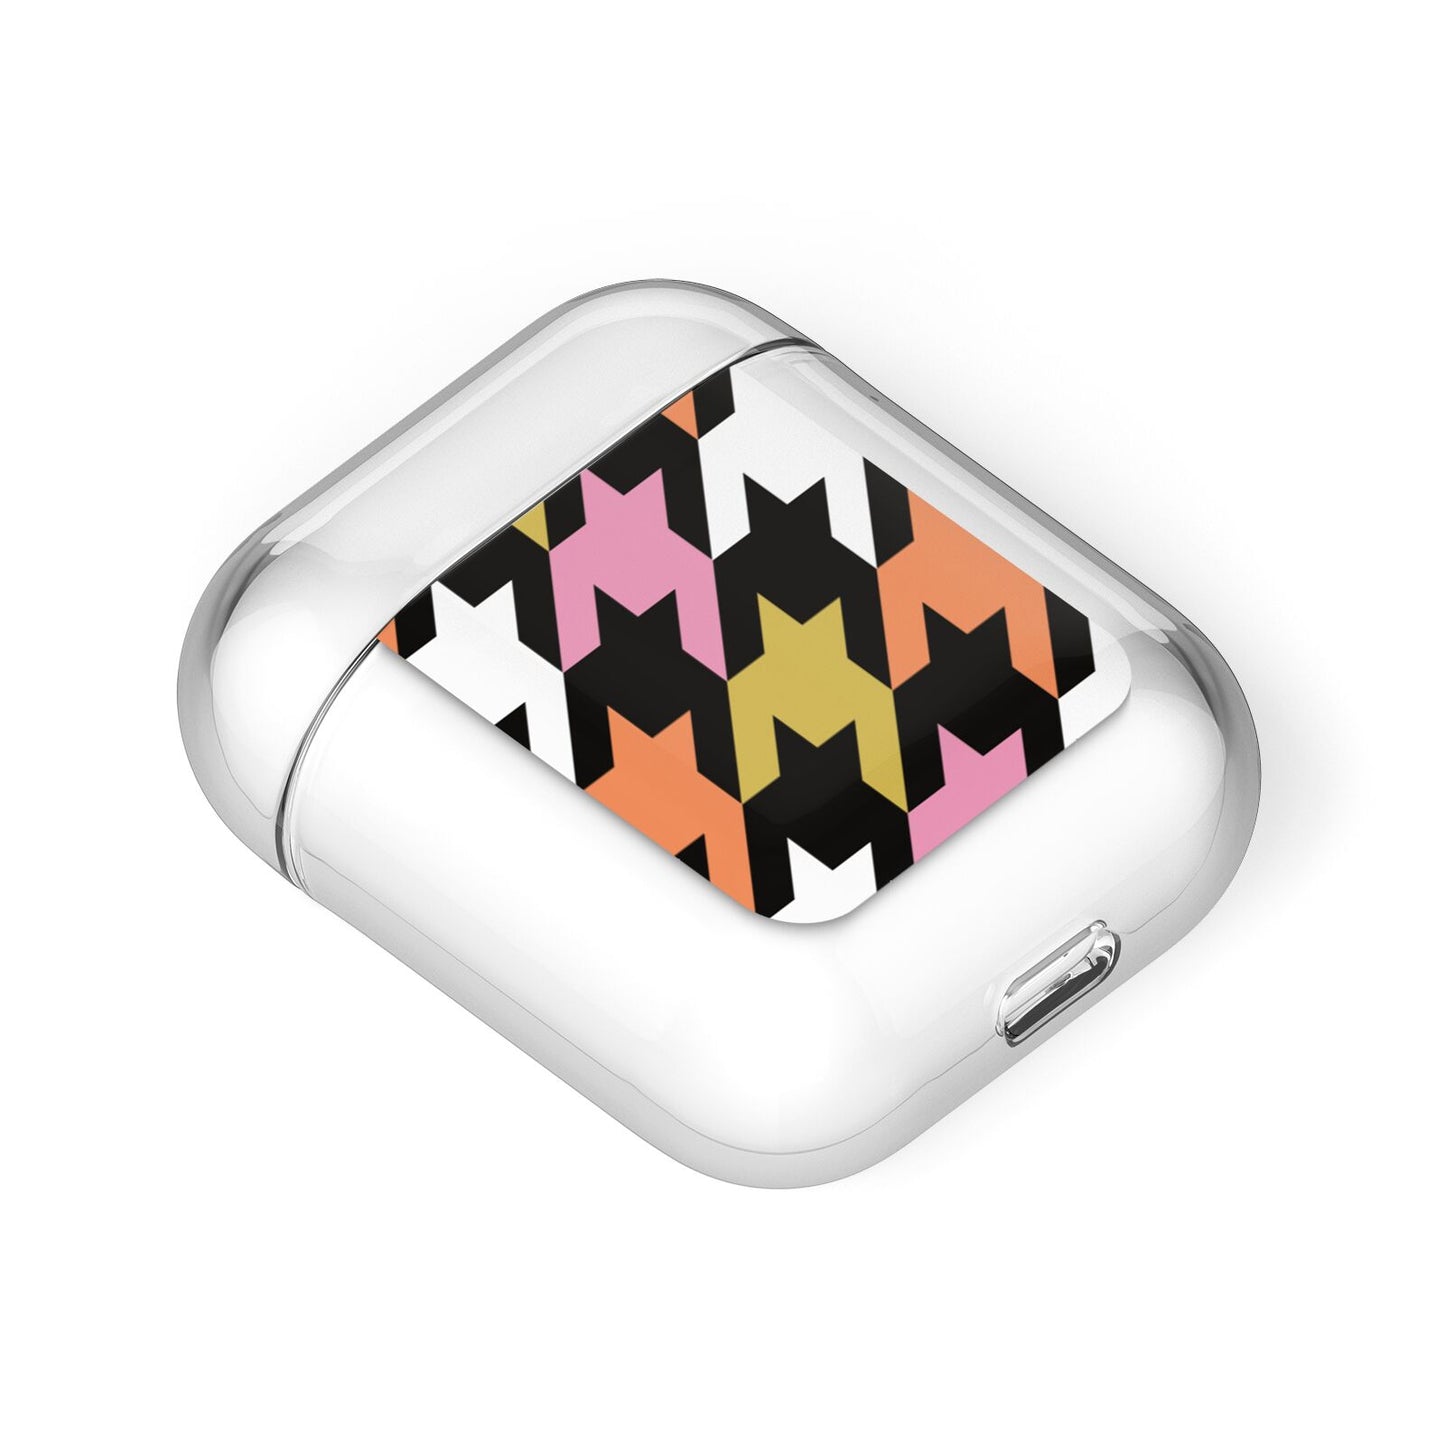 Retro Houndstooth AirPods Case Laid Flat